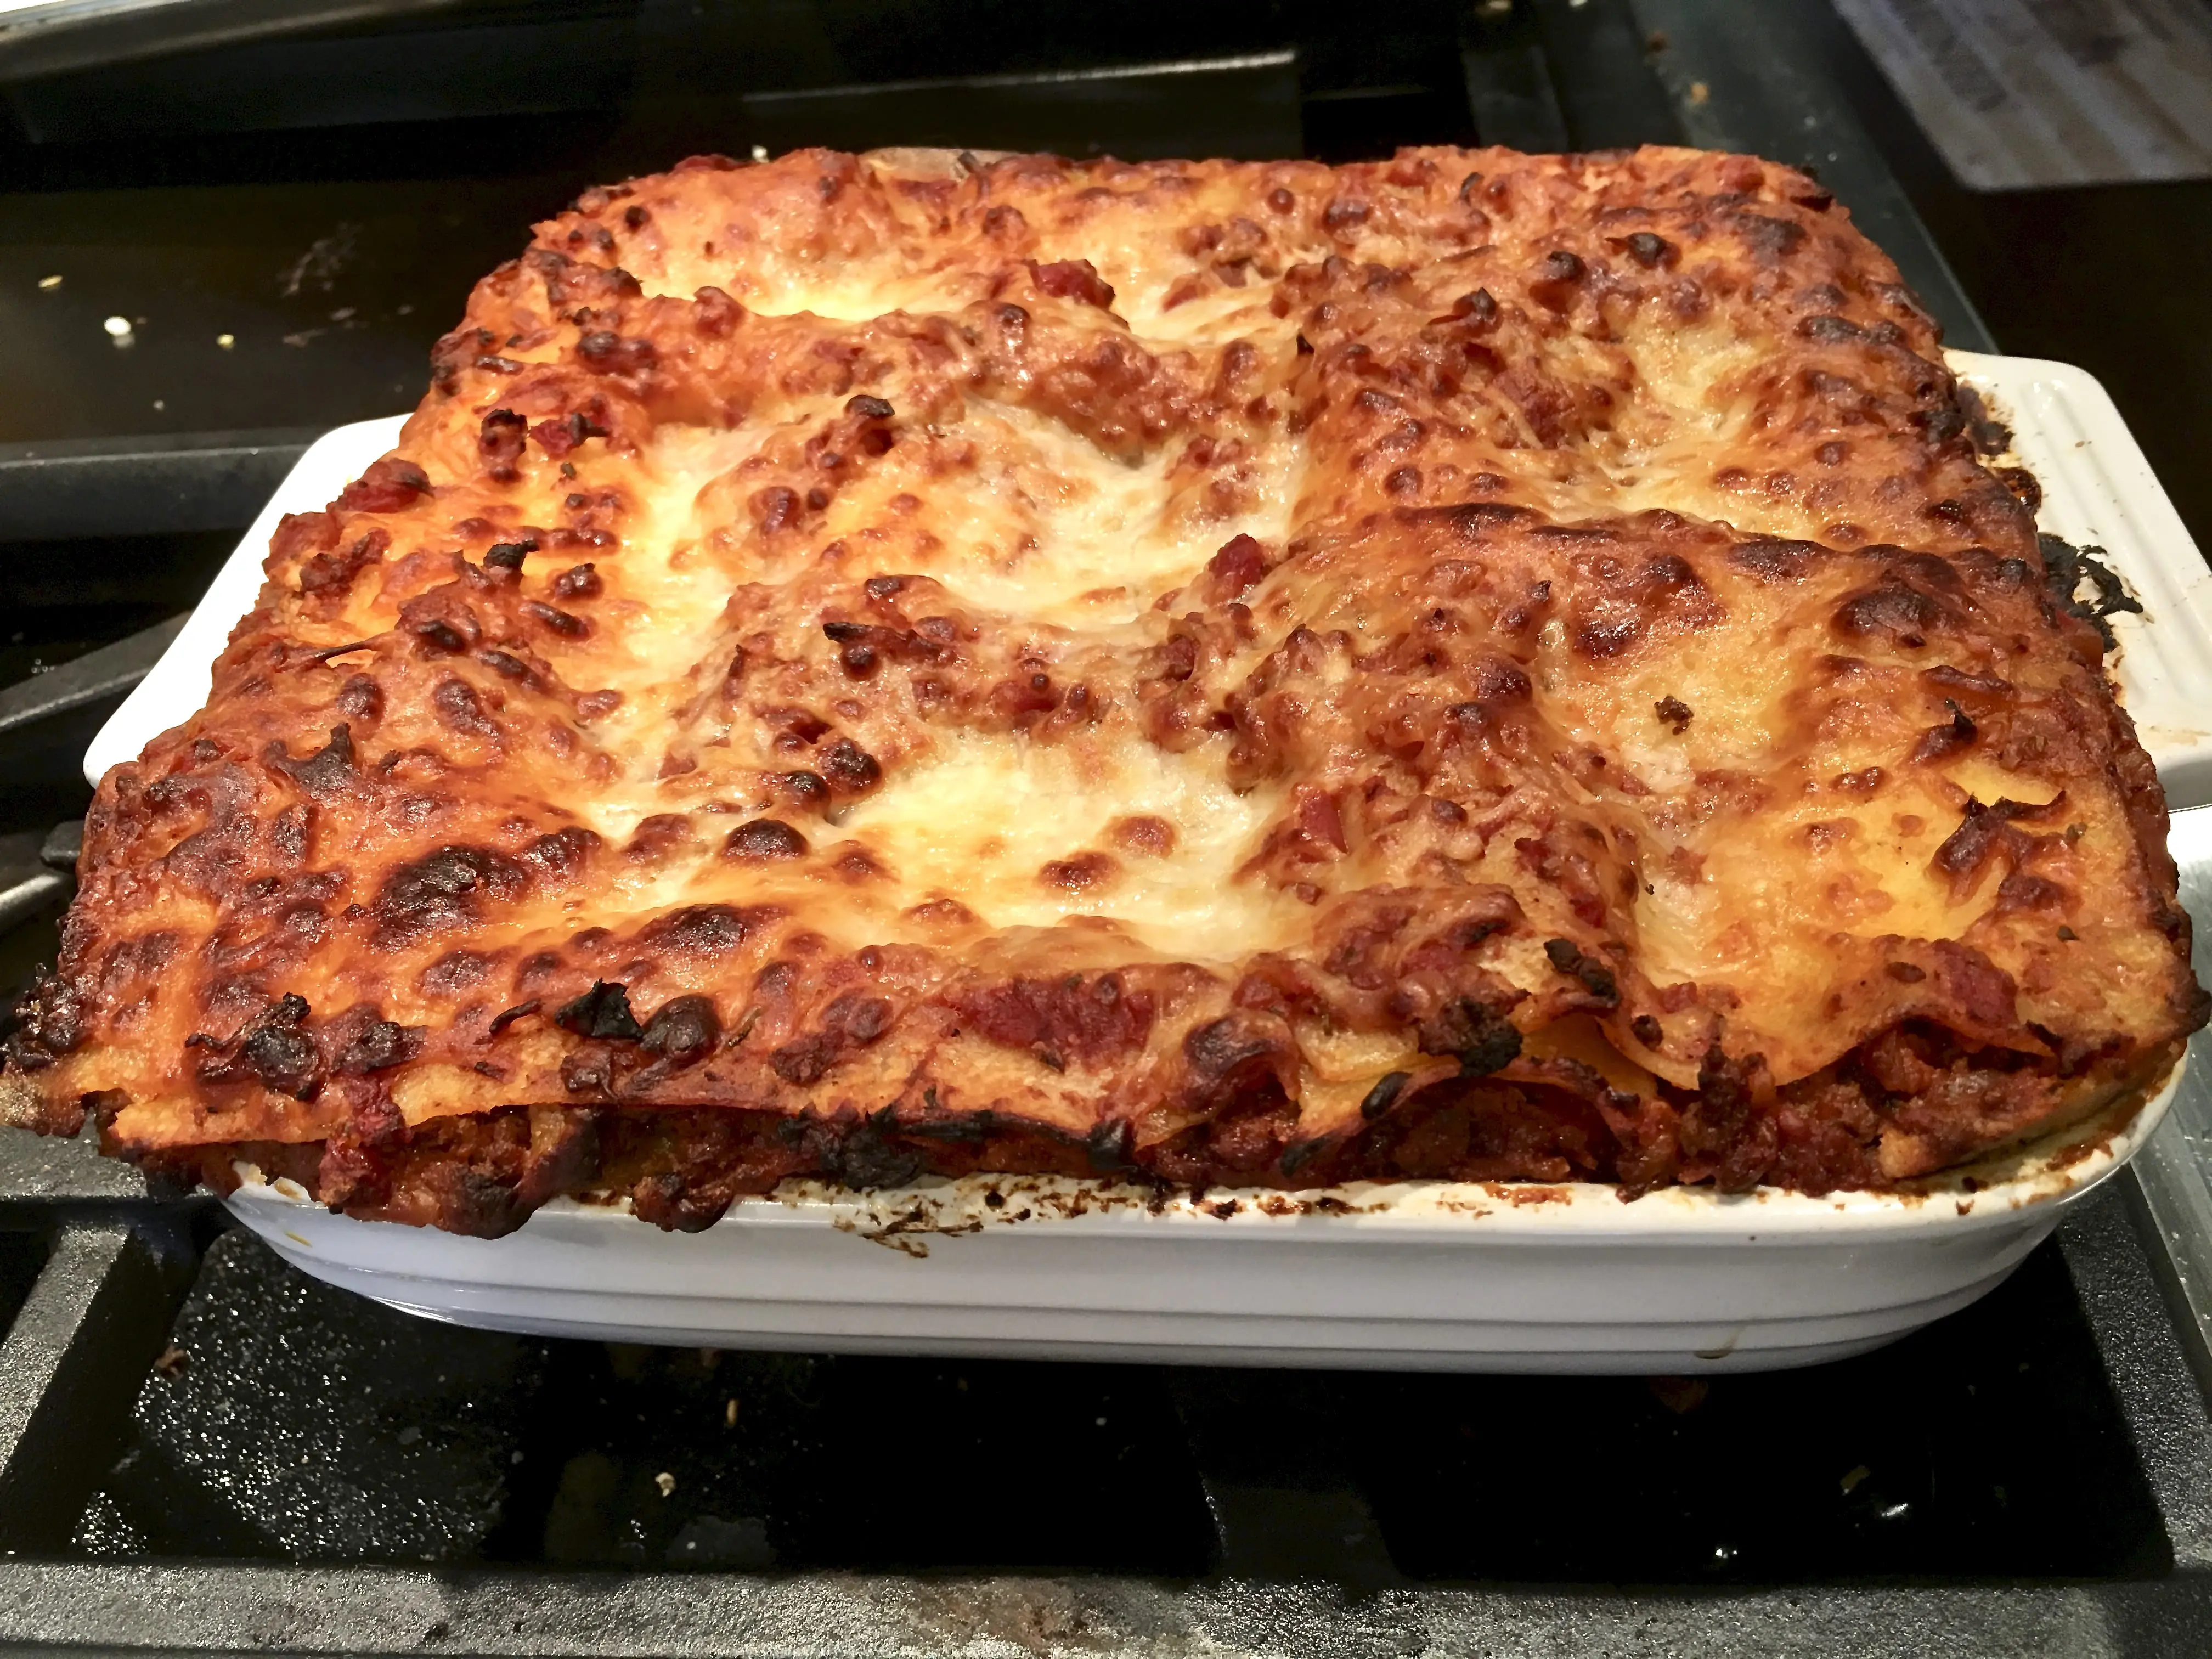 a freshly baked lasagna that's low sodium and gluten-free in a white casserole ready to cut and serve